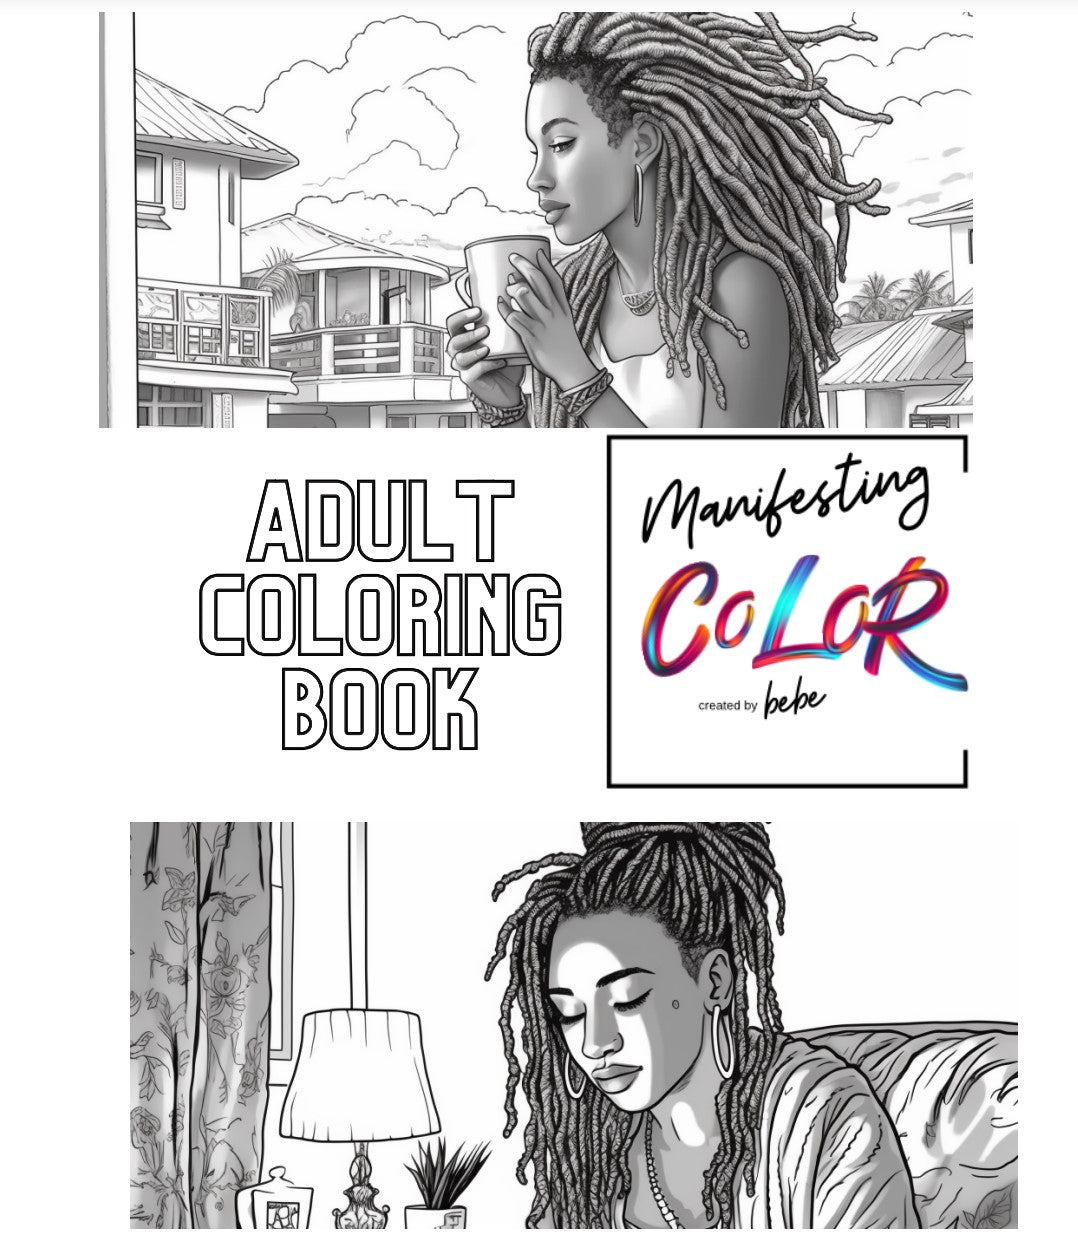 Manifesting Color An Adult Coloring Book with Self Love Affirmations PAPERBACK - manifesting with anxiety